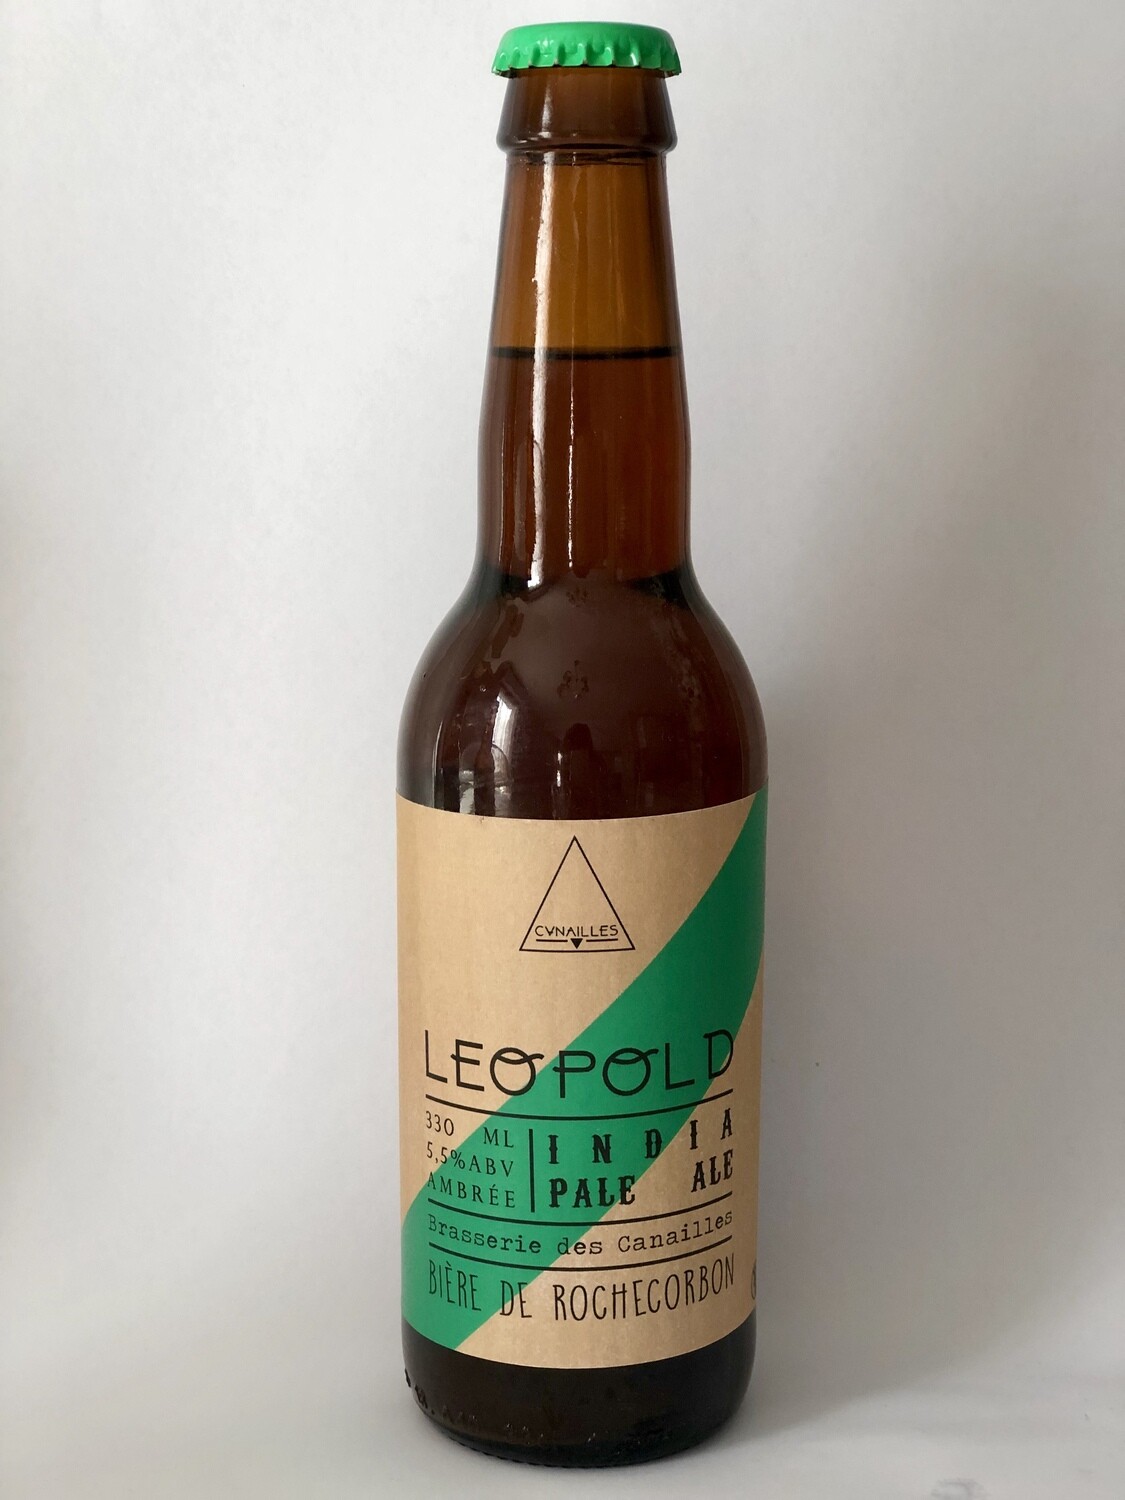 LEOPOLD (IPA) - 33cl / 5,5°